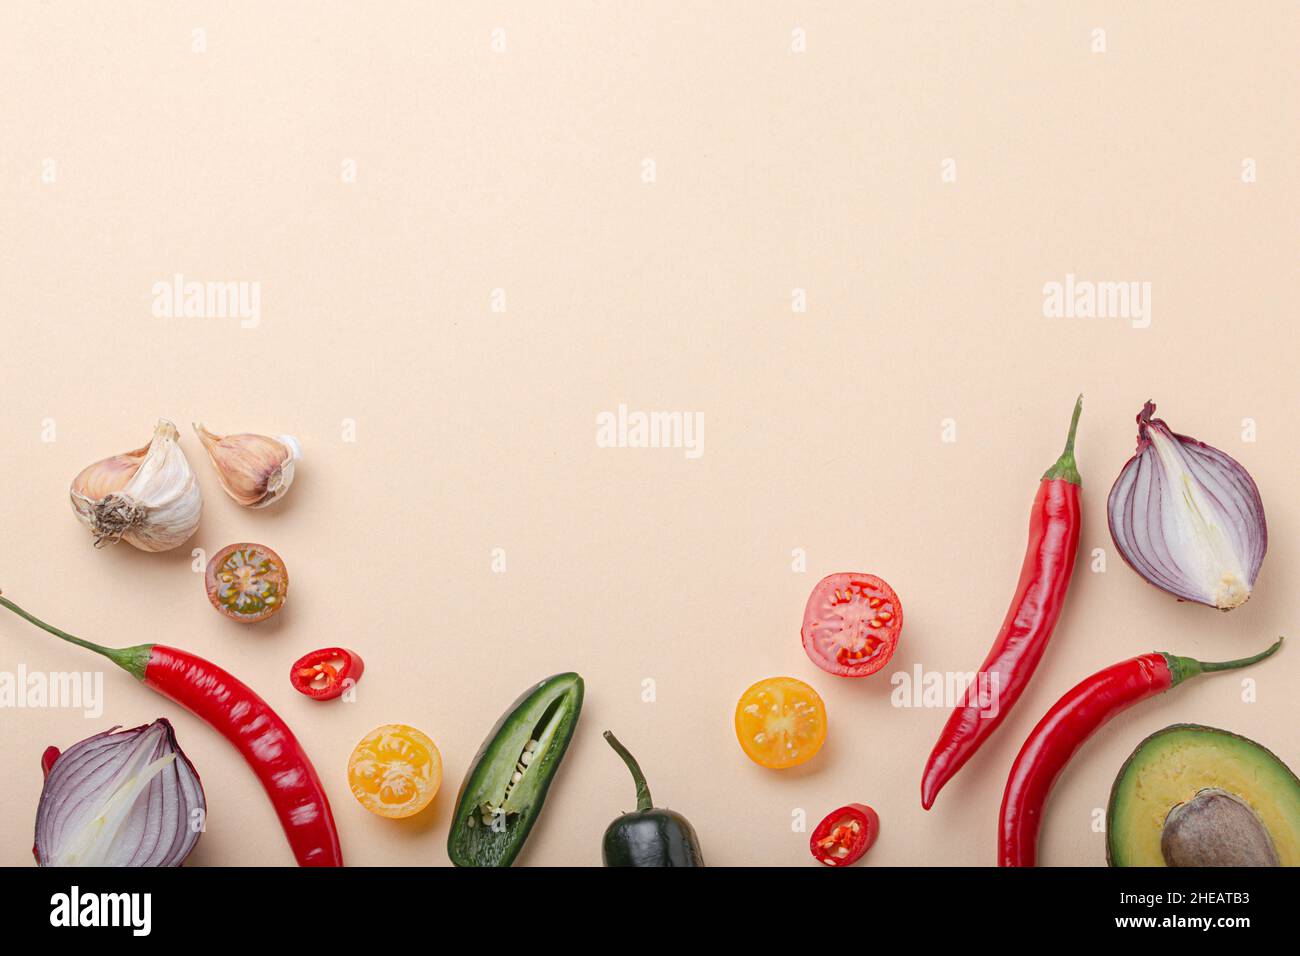 Creative cooking healthy organic food concept background made of colourful fruit and vegetables Stock Photo